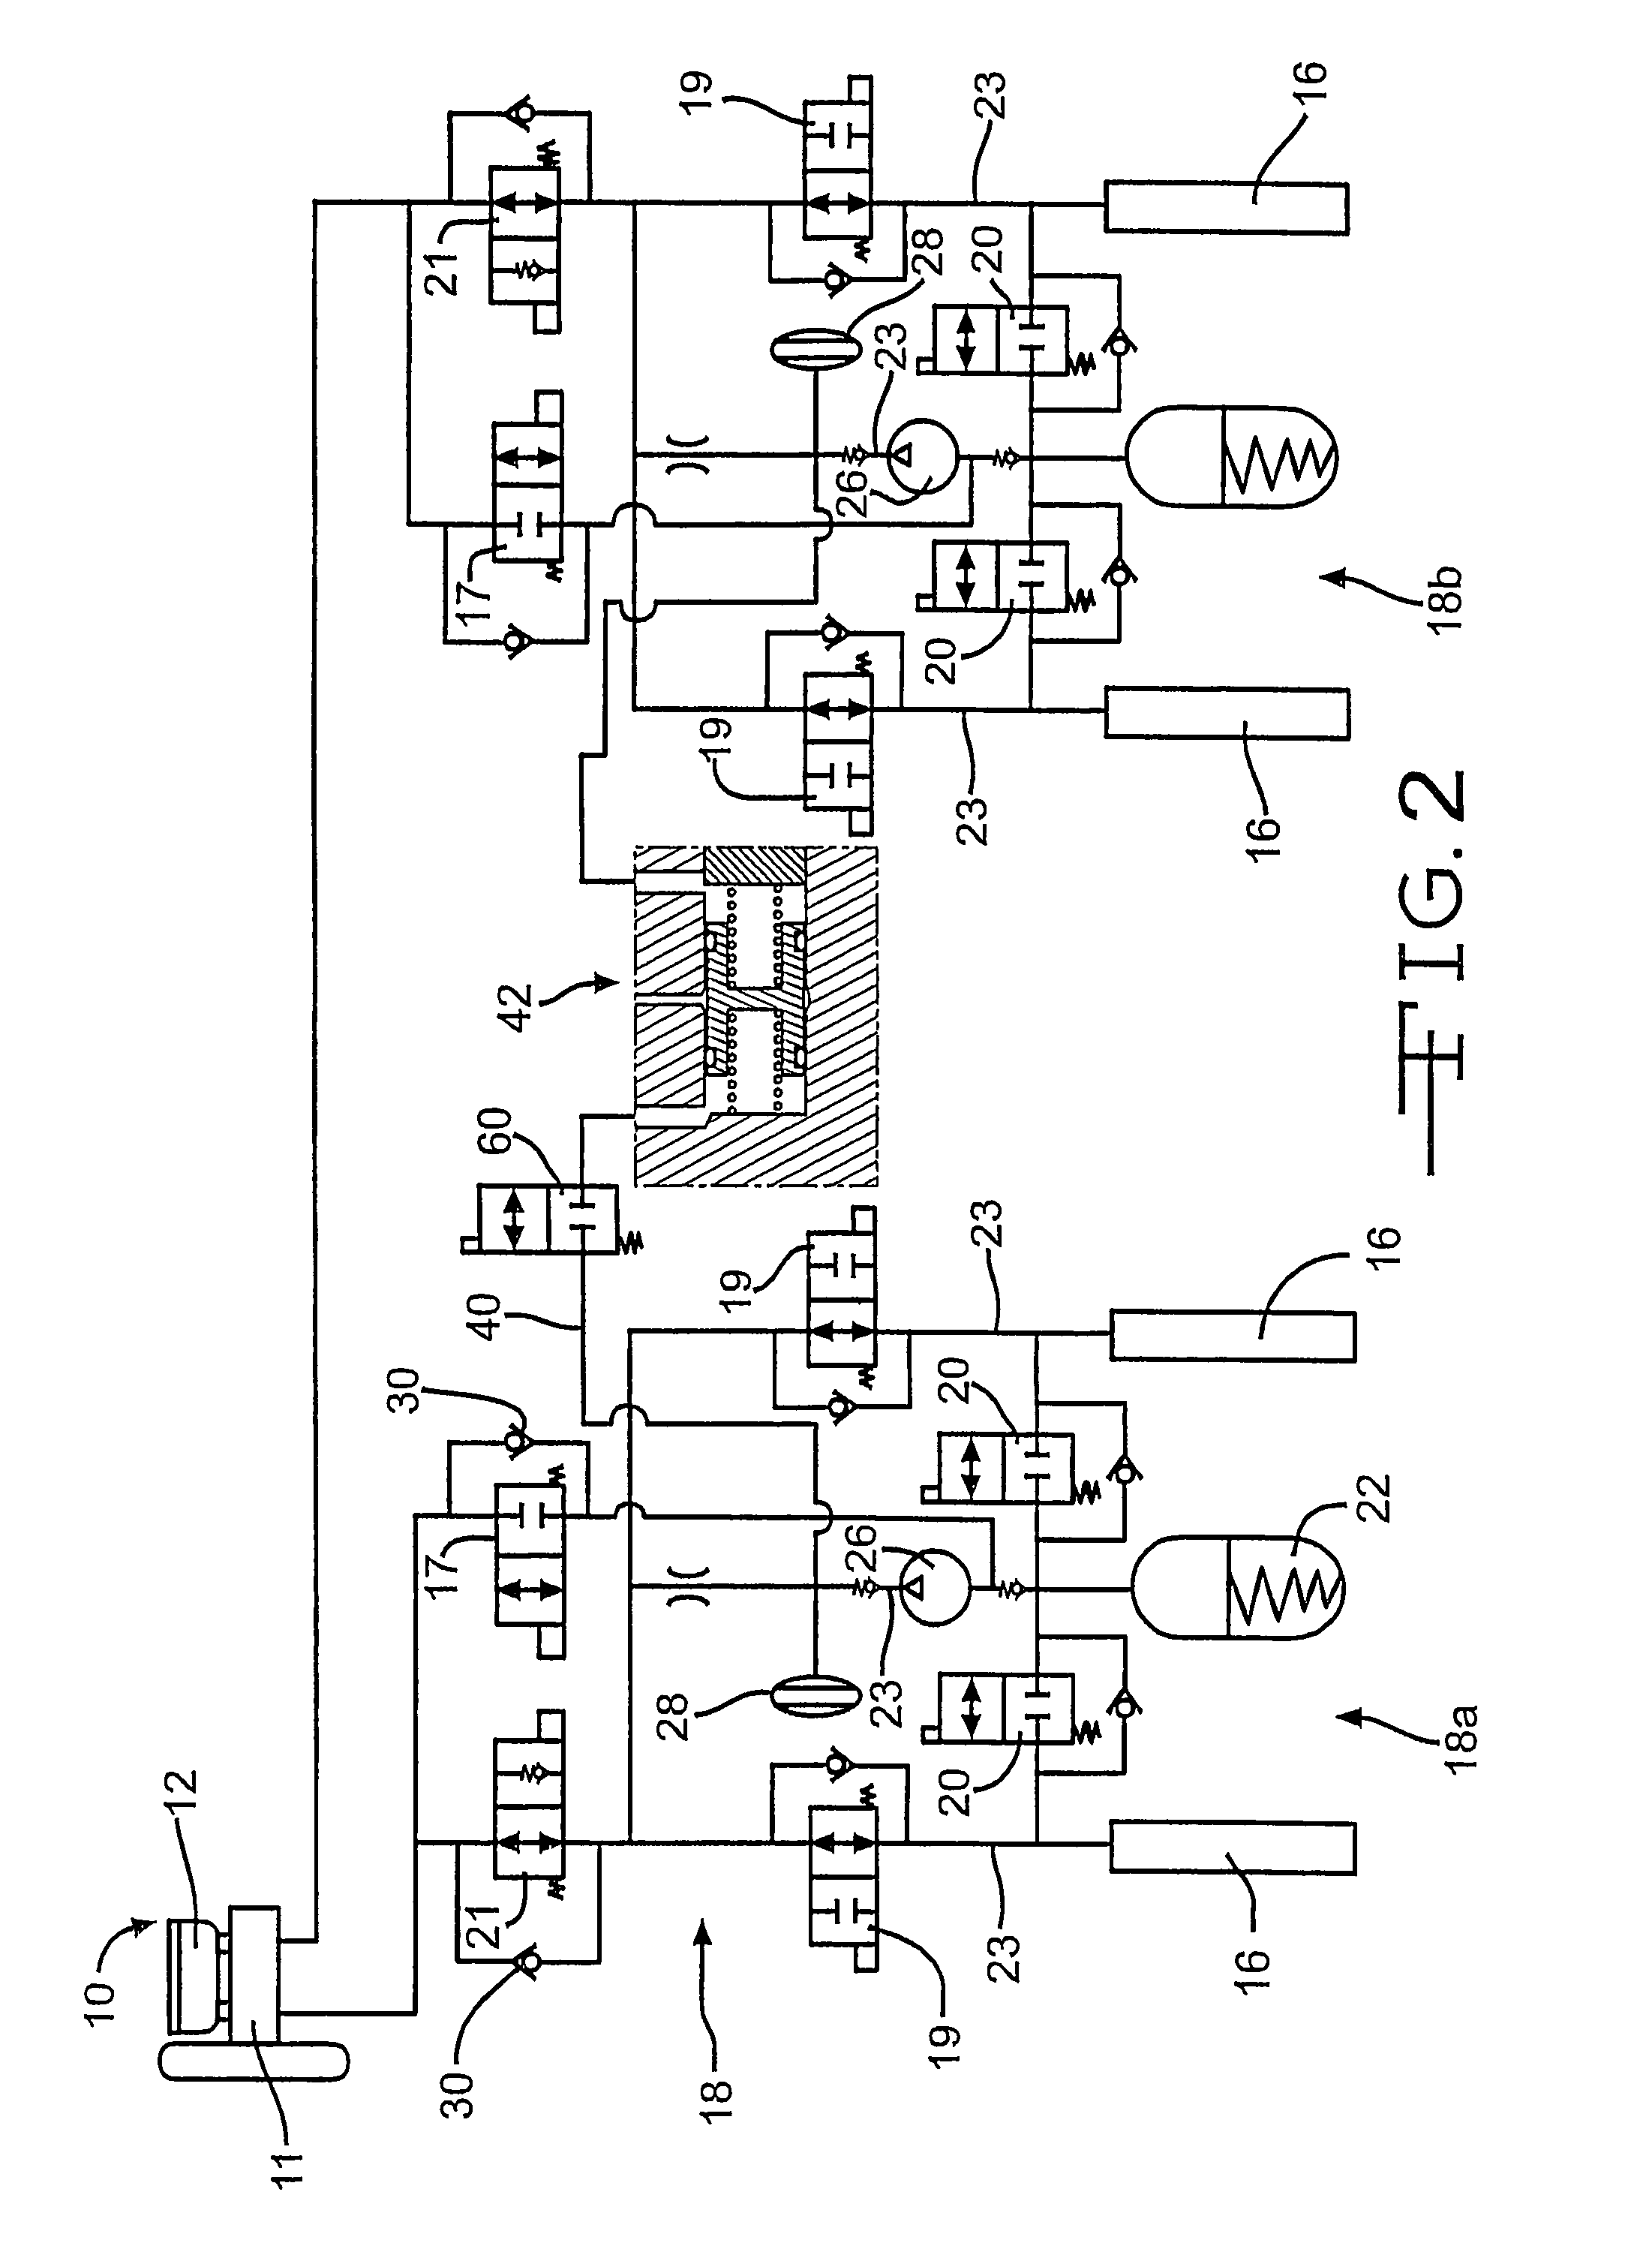 Floating piston for augmenting pressurized fluid flow during vehicle braking operations